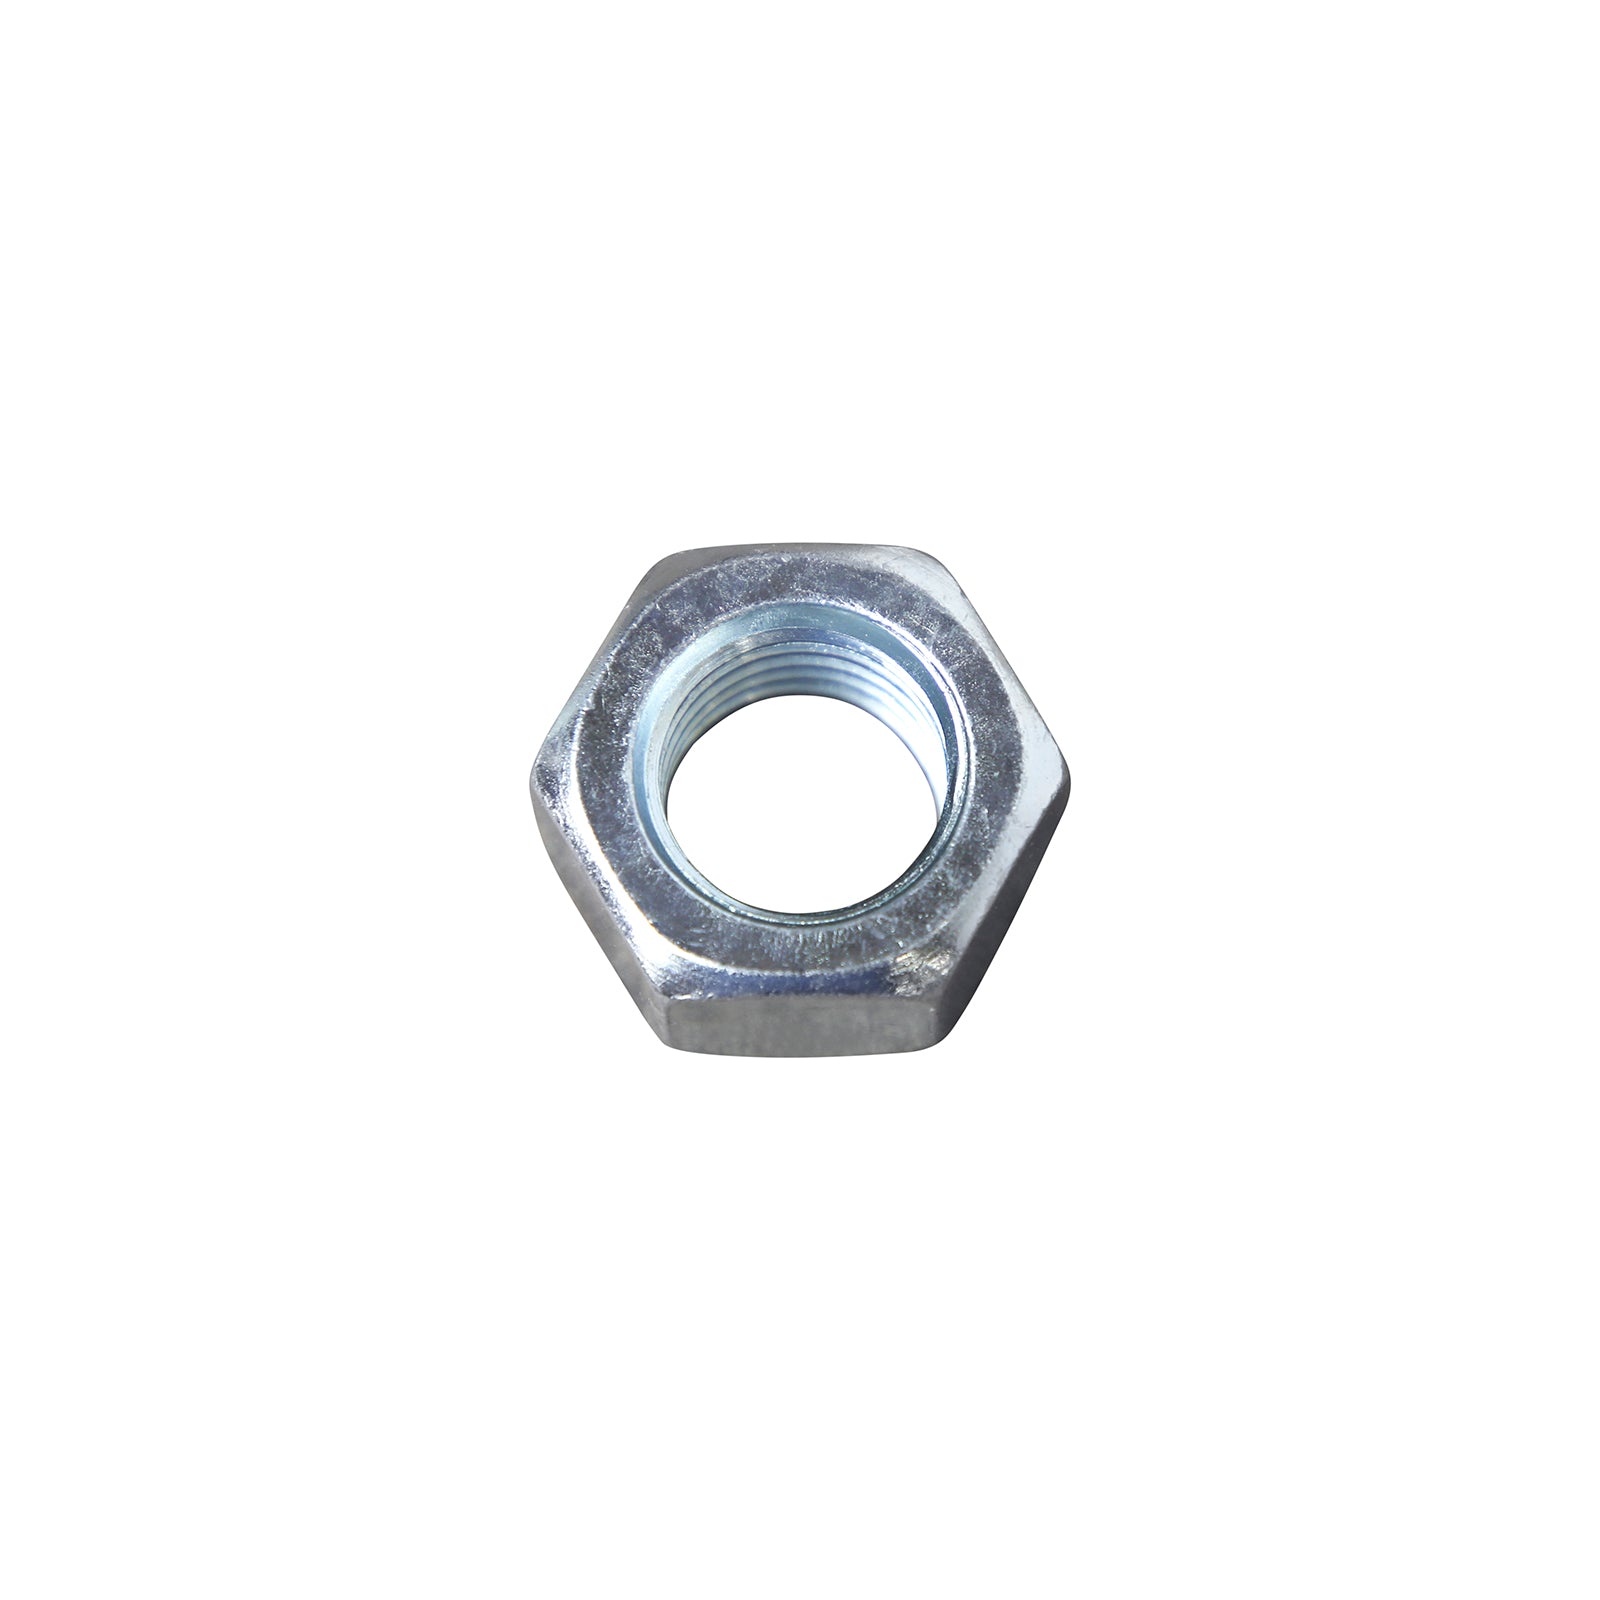 7/8"-9 Conquest Hex Nut - Zinc Plated